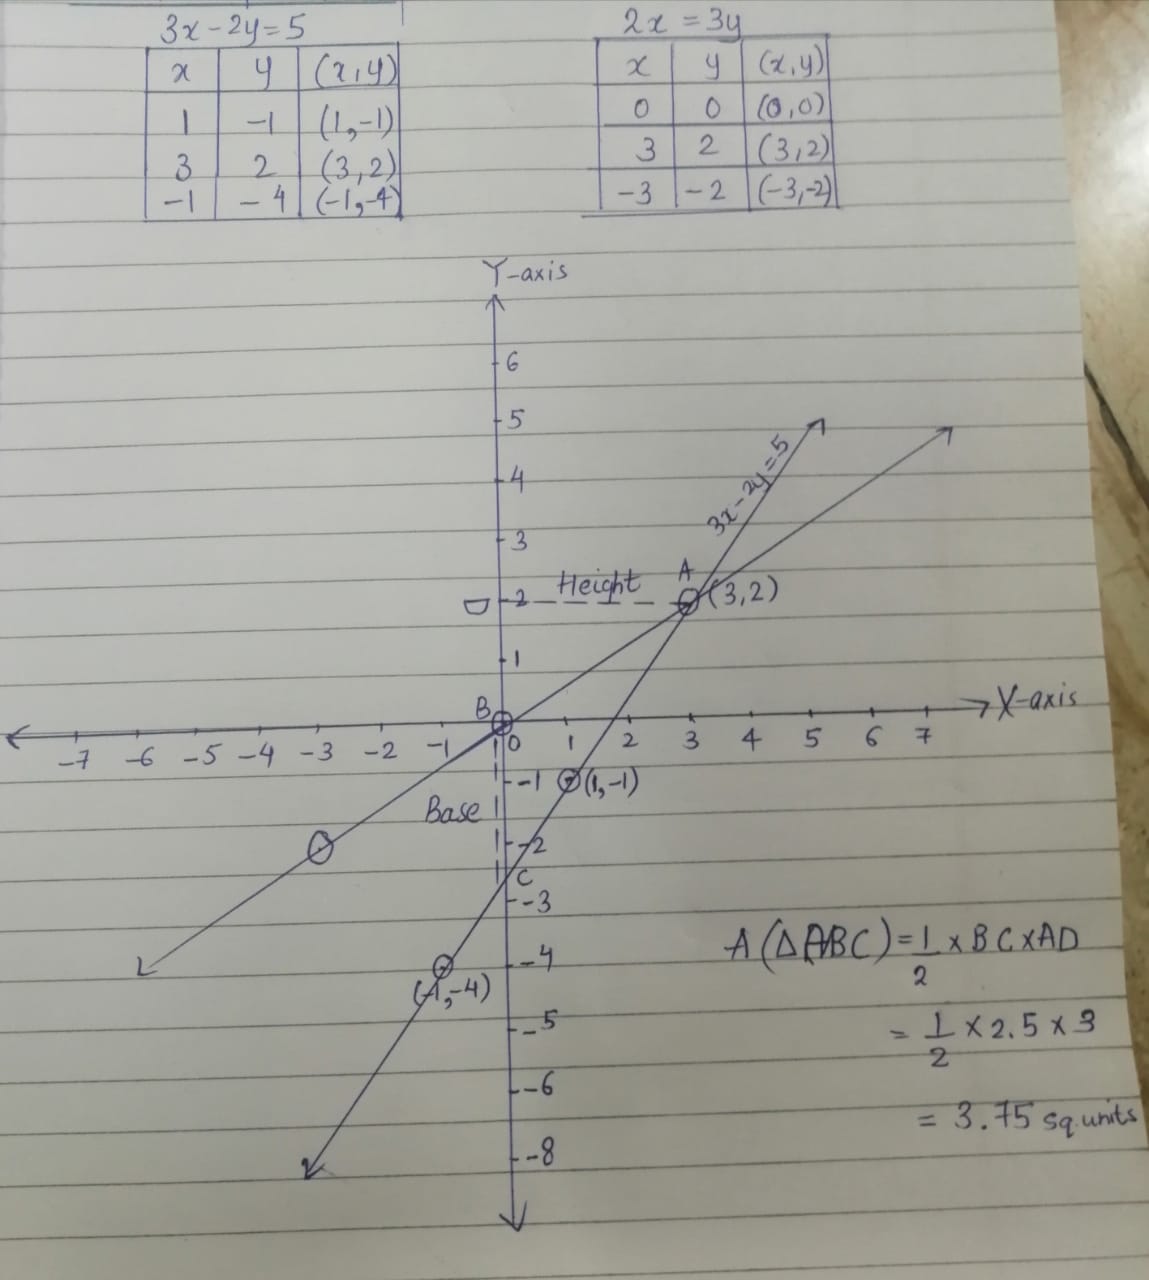 Use Graph Paper For This Question Draw The Graph Of 3x 2y 5 And 2x 3y On The Same Axes Use 2cm 1 Unit On Both The Axes And Plot Only 3